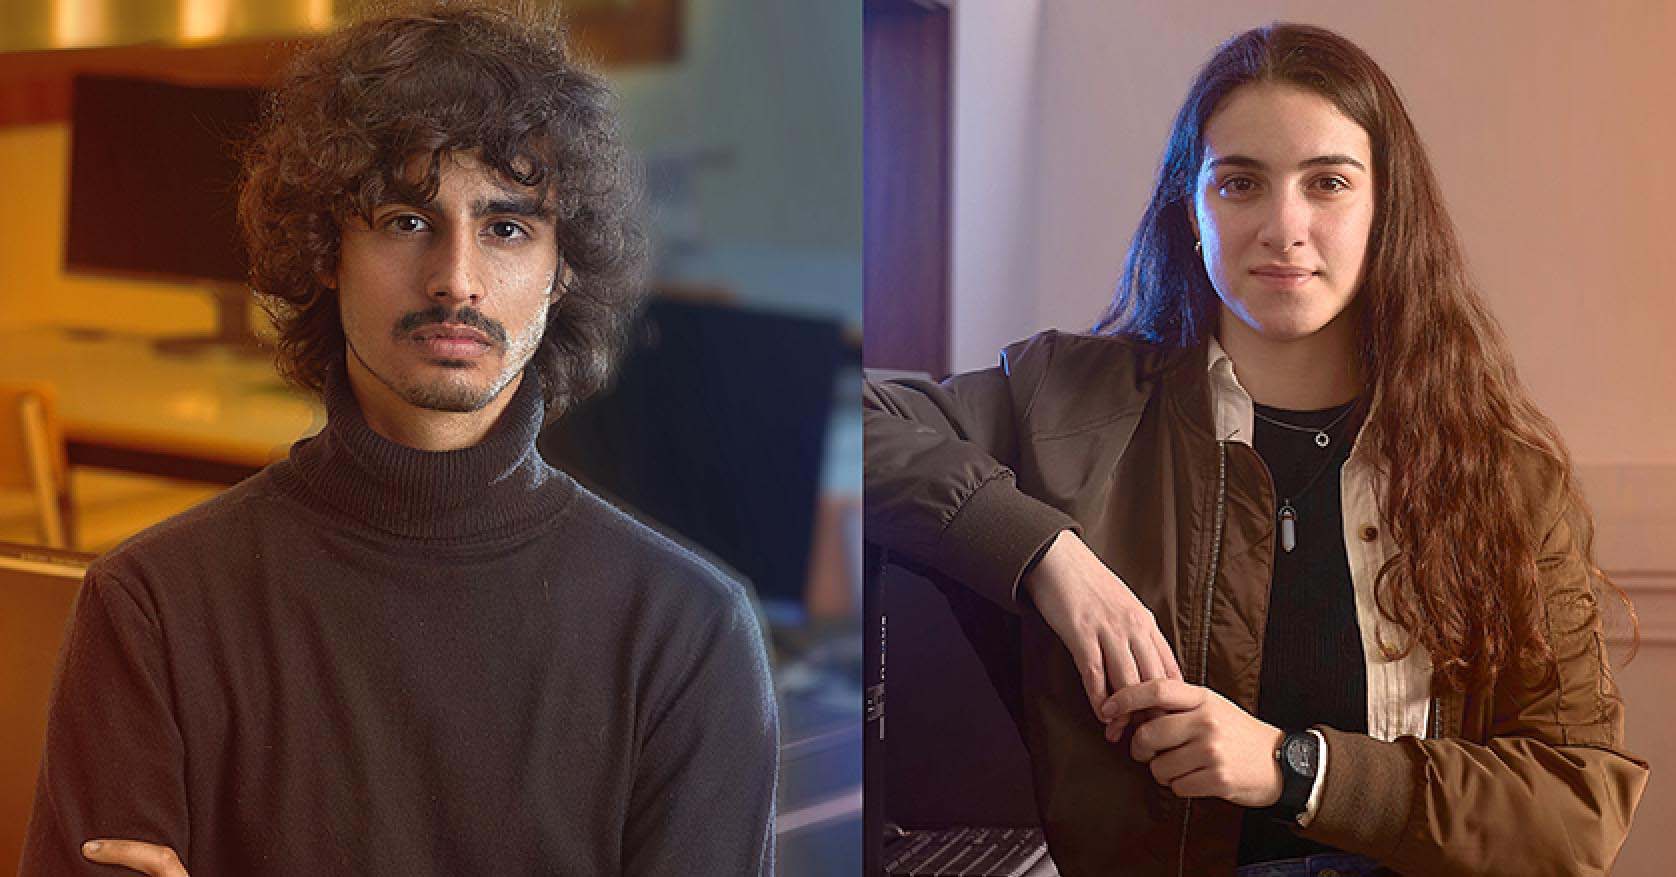 Rúben Dhanaraju and  Patrícia Oliveira: they took part  dual vocational certifications supported by the European Social Fund.